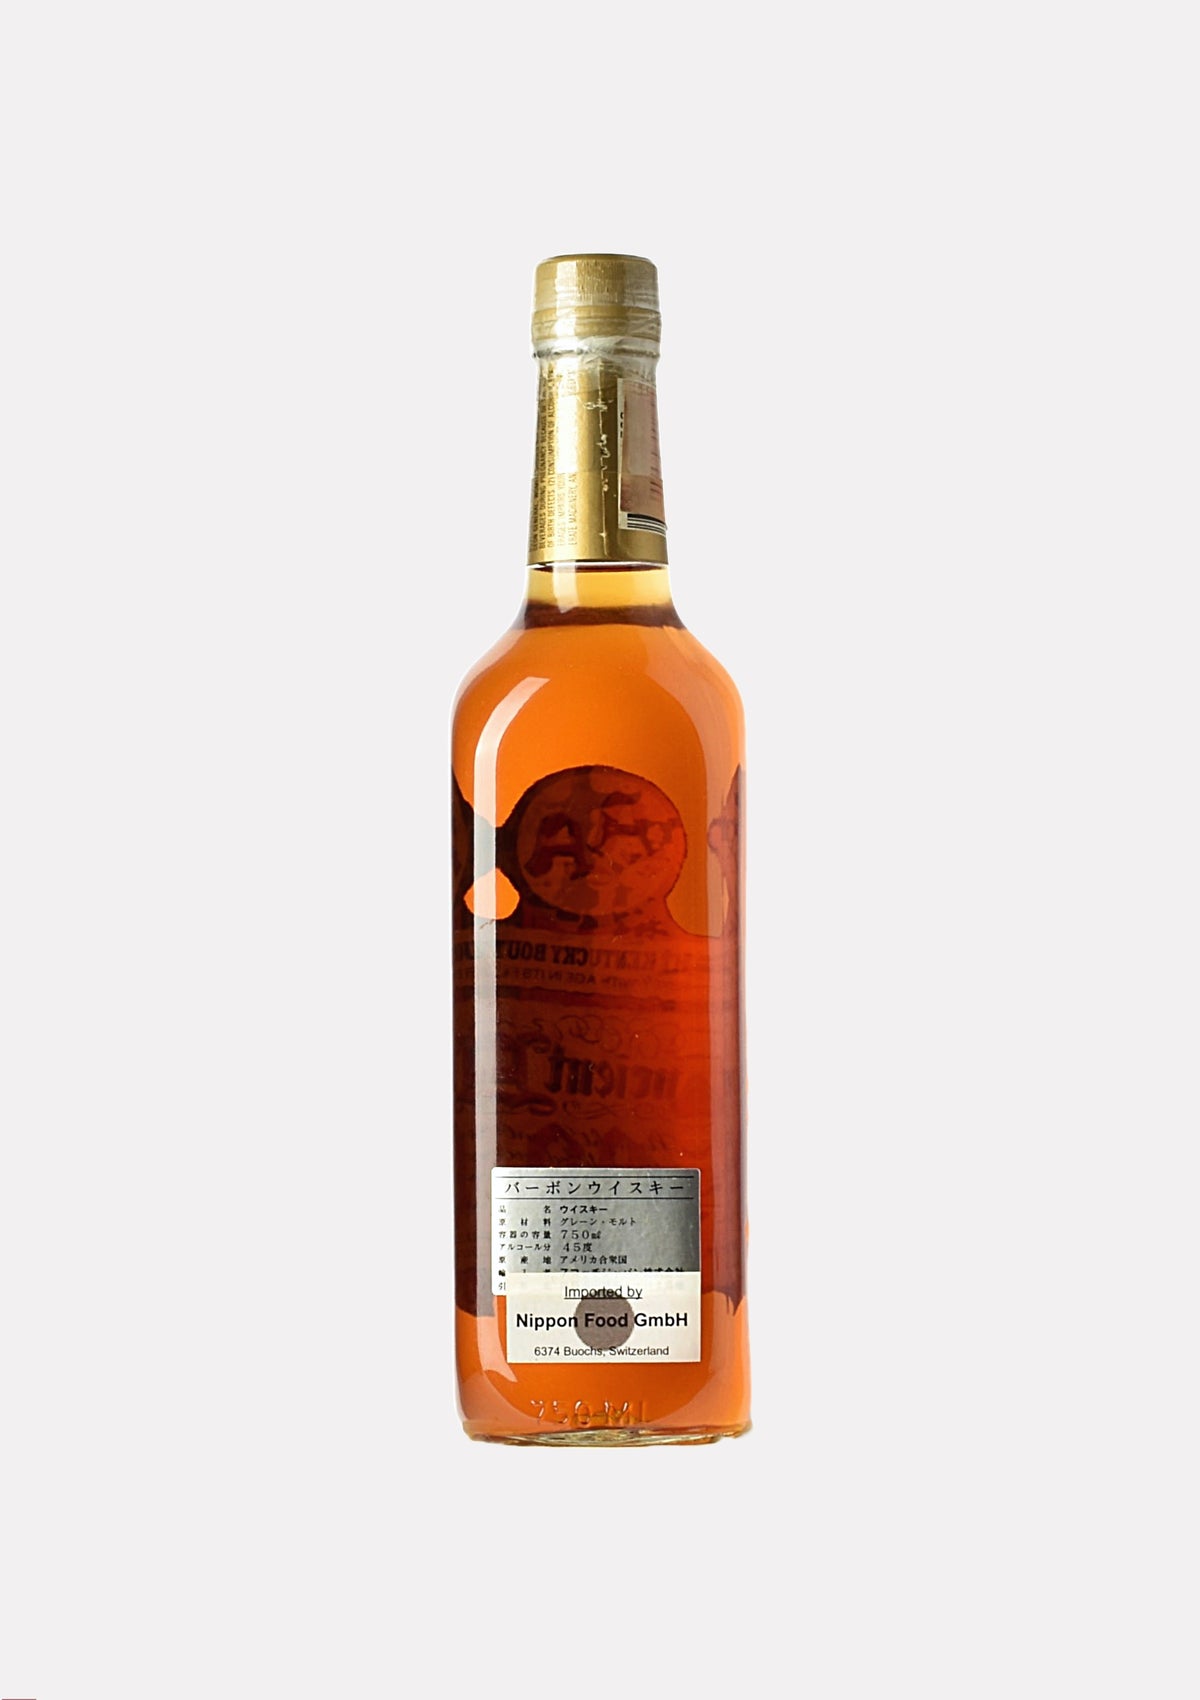 Ancient Age 90 Kentucky Straight Bourbon Whiskey